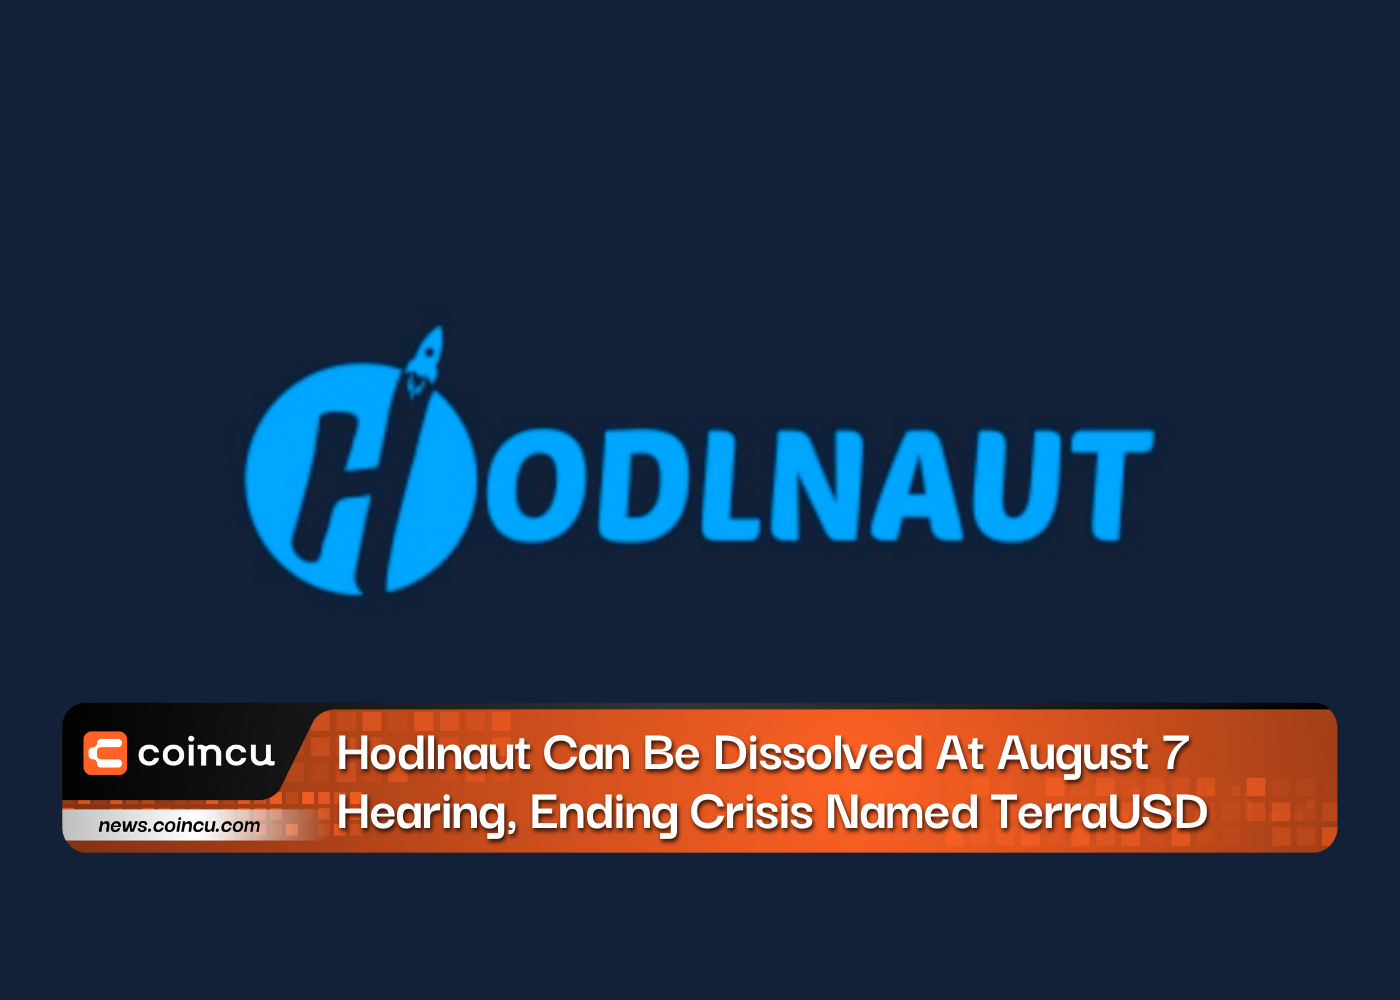 Hodlnaut Can Be Dissolved At August 7 Hearing, Ending Crisis Named TerraUSD